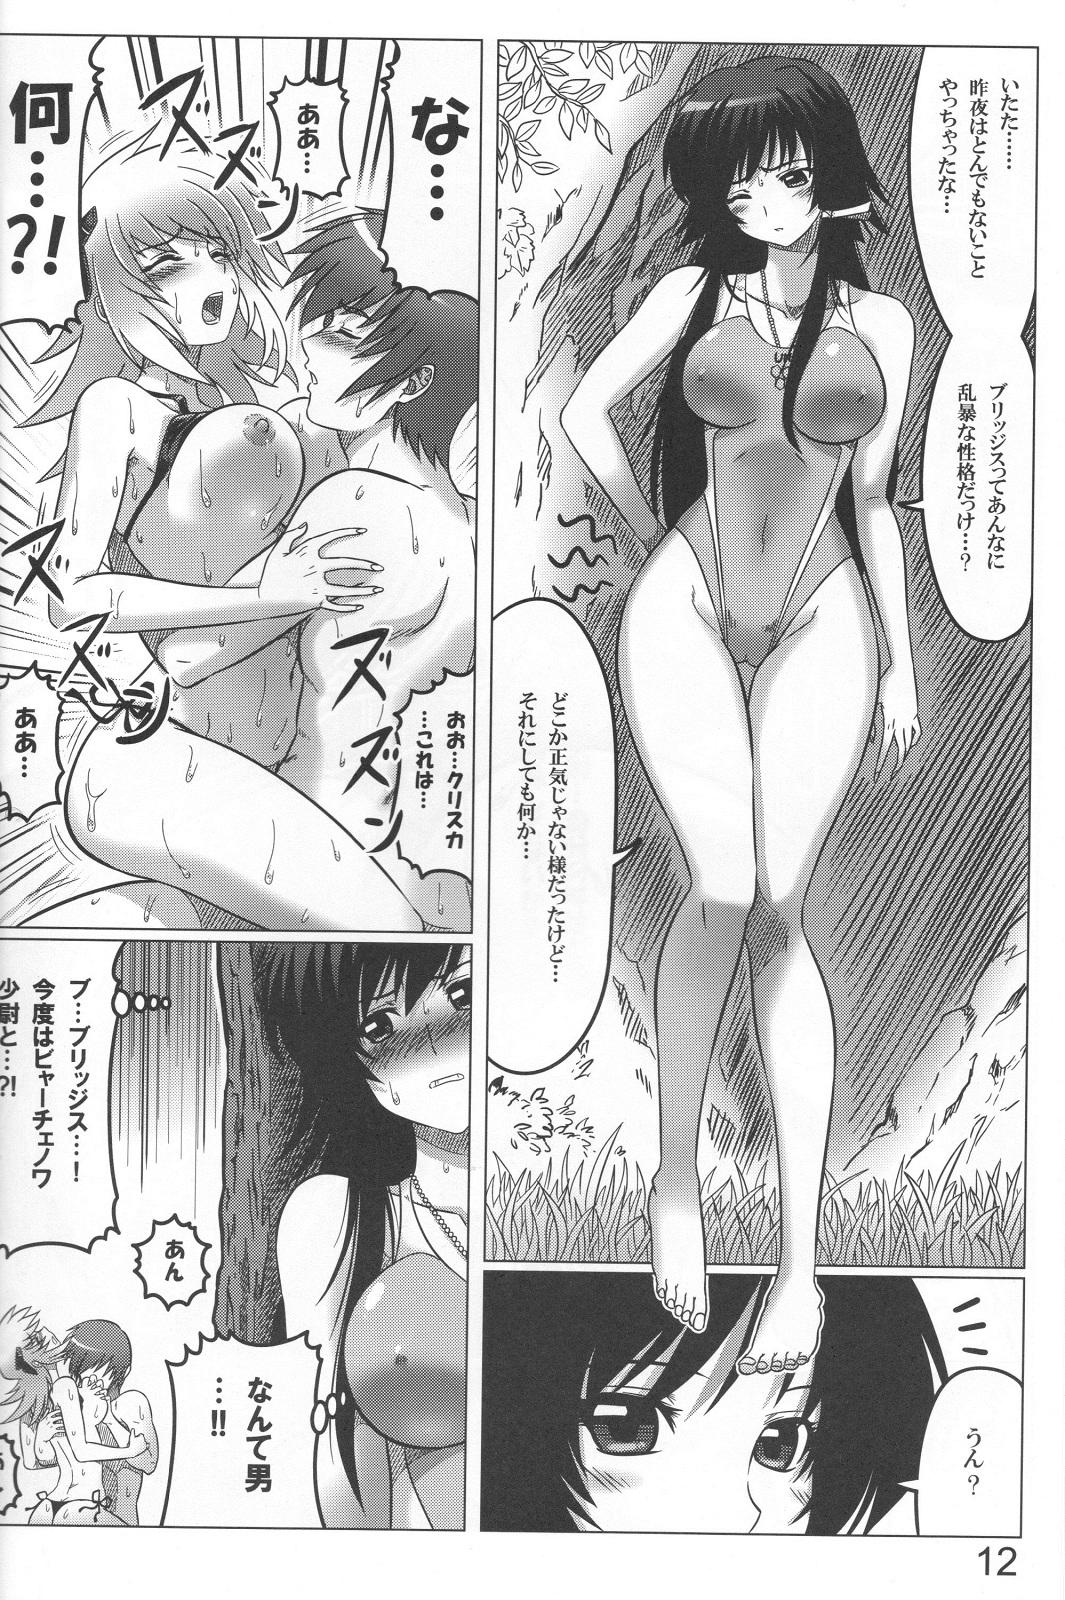 Ejaculation Intermission H - Muv-luv alternative total eclipse Youth Porn - Page 12